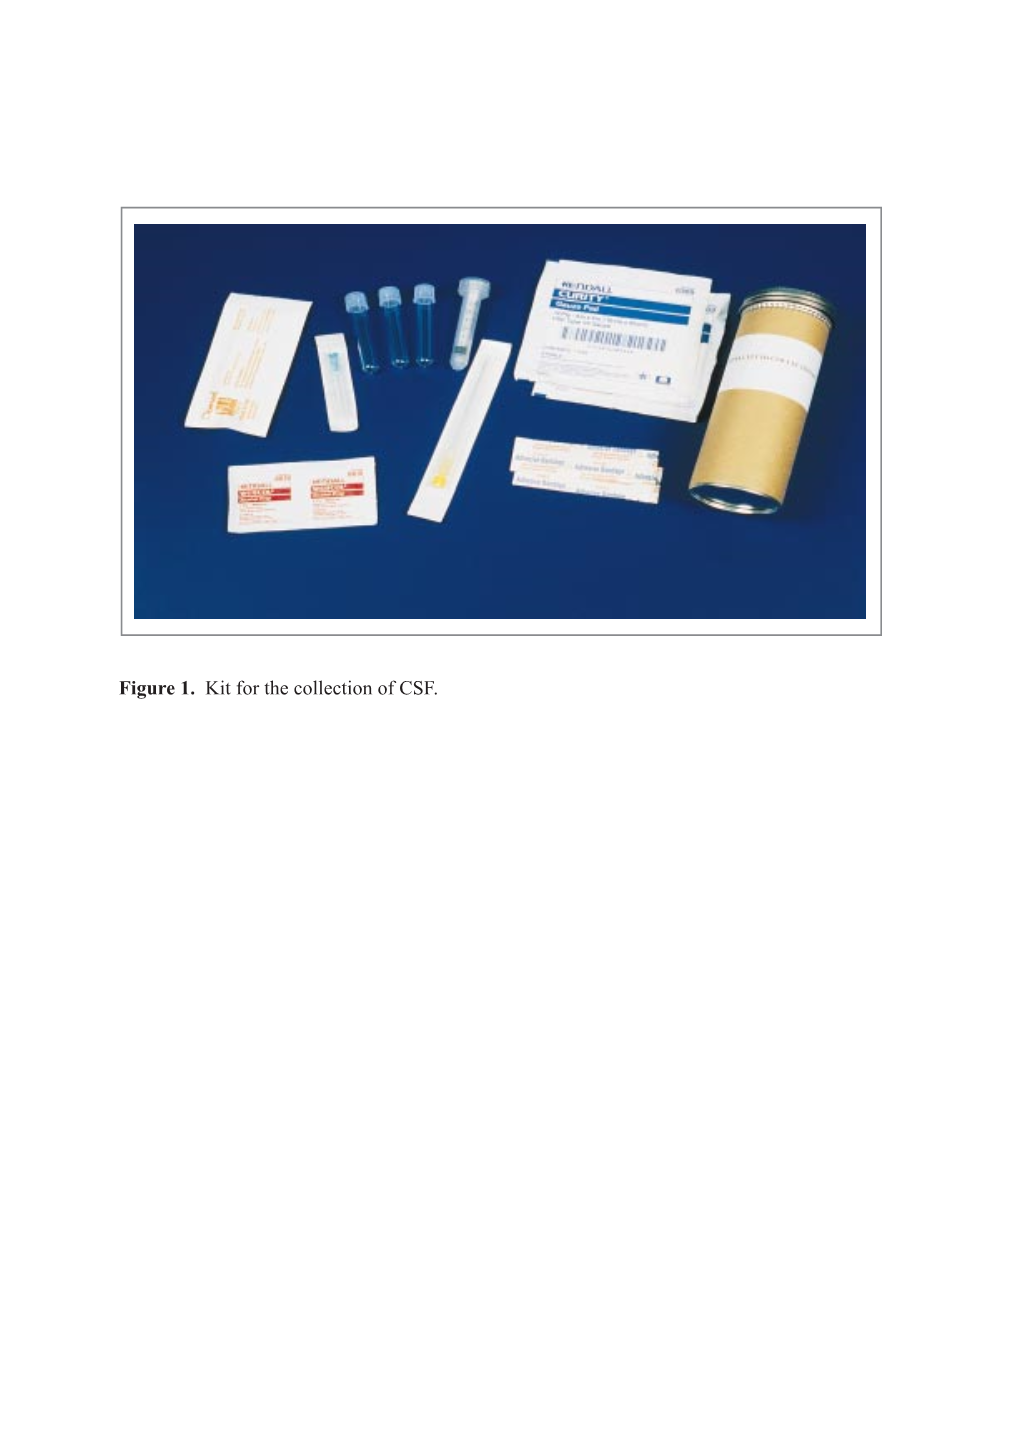 Figure 1. Kit for the Collection of CSF. A